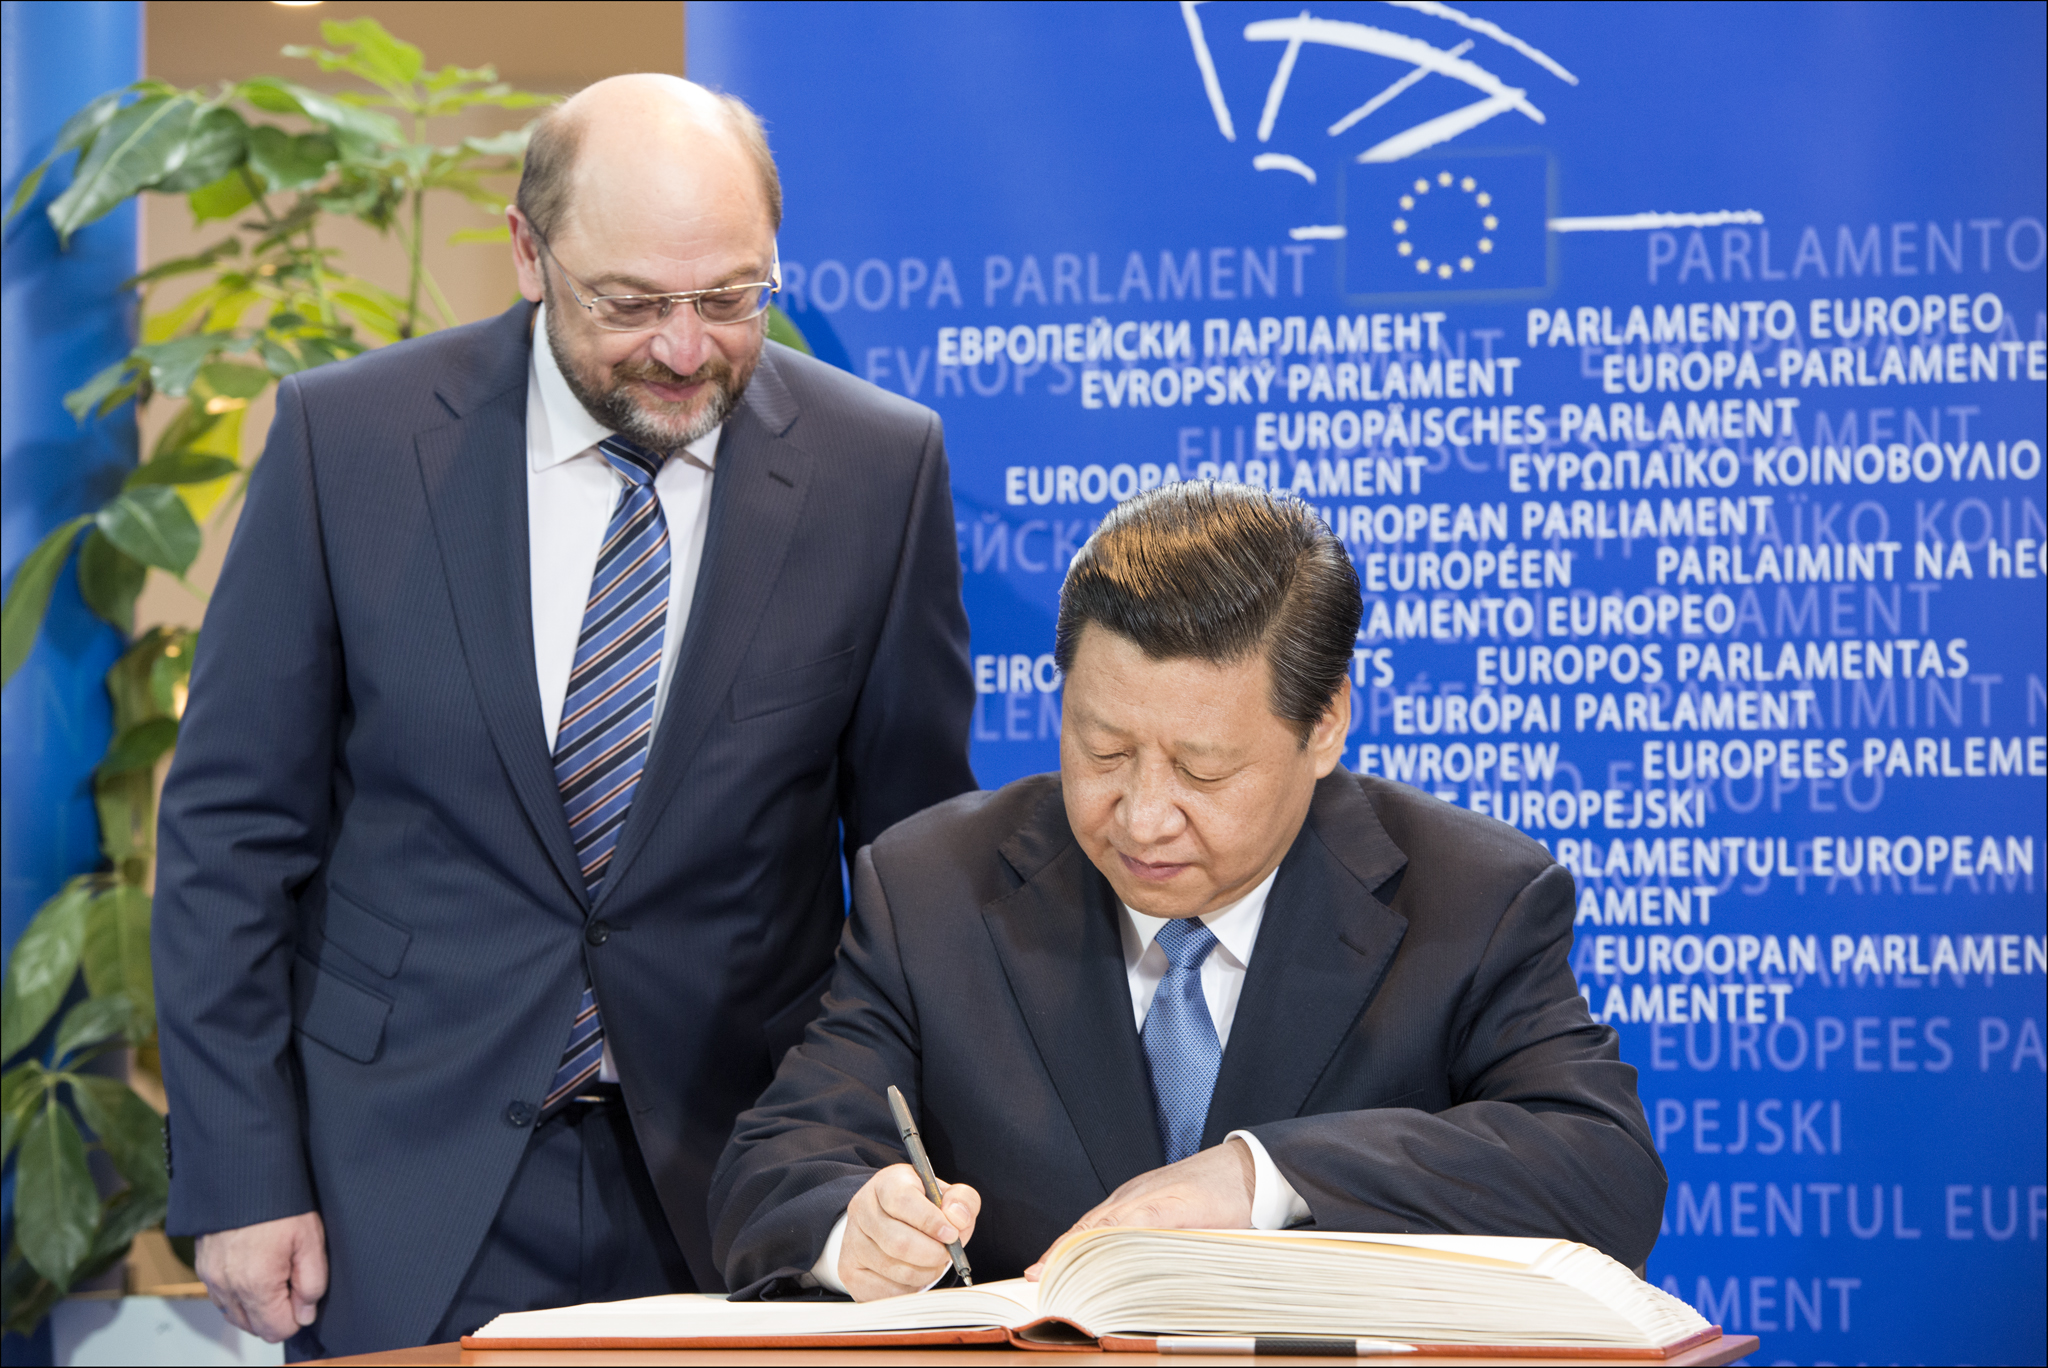 Schulz watches over the shoulder of Xi Jinping as he signs a document. Source: Flickr / European Parliament